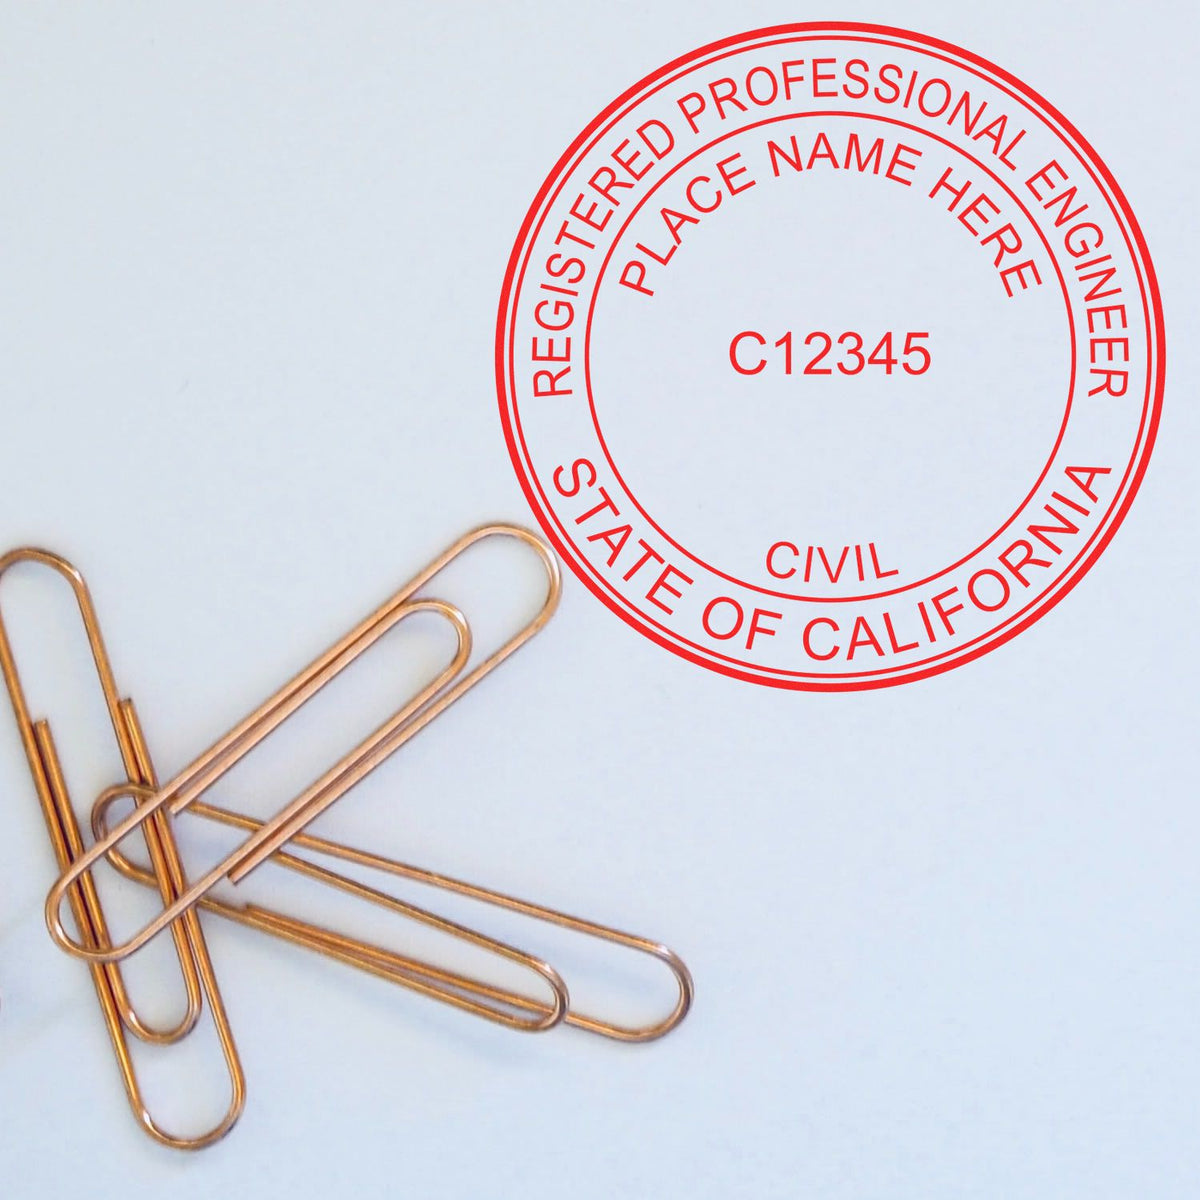 A lifestyle photo showing a stamped image of the California Professional Engineer Seal Stamp on a piece of paper